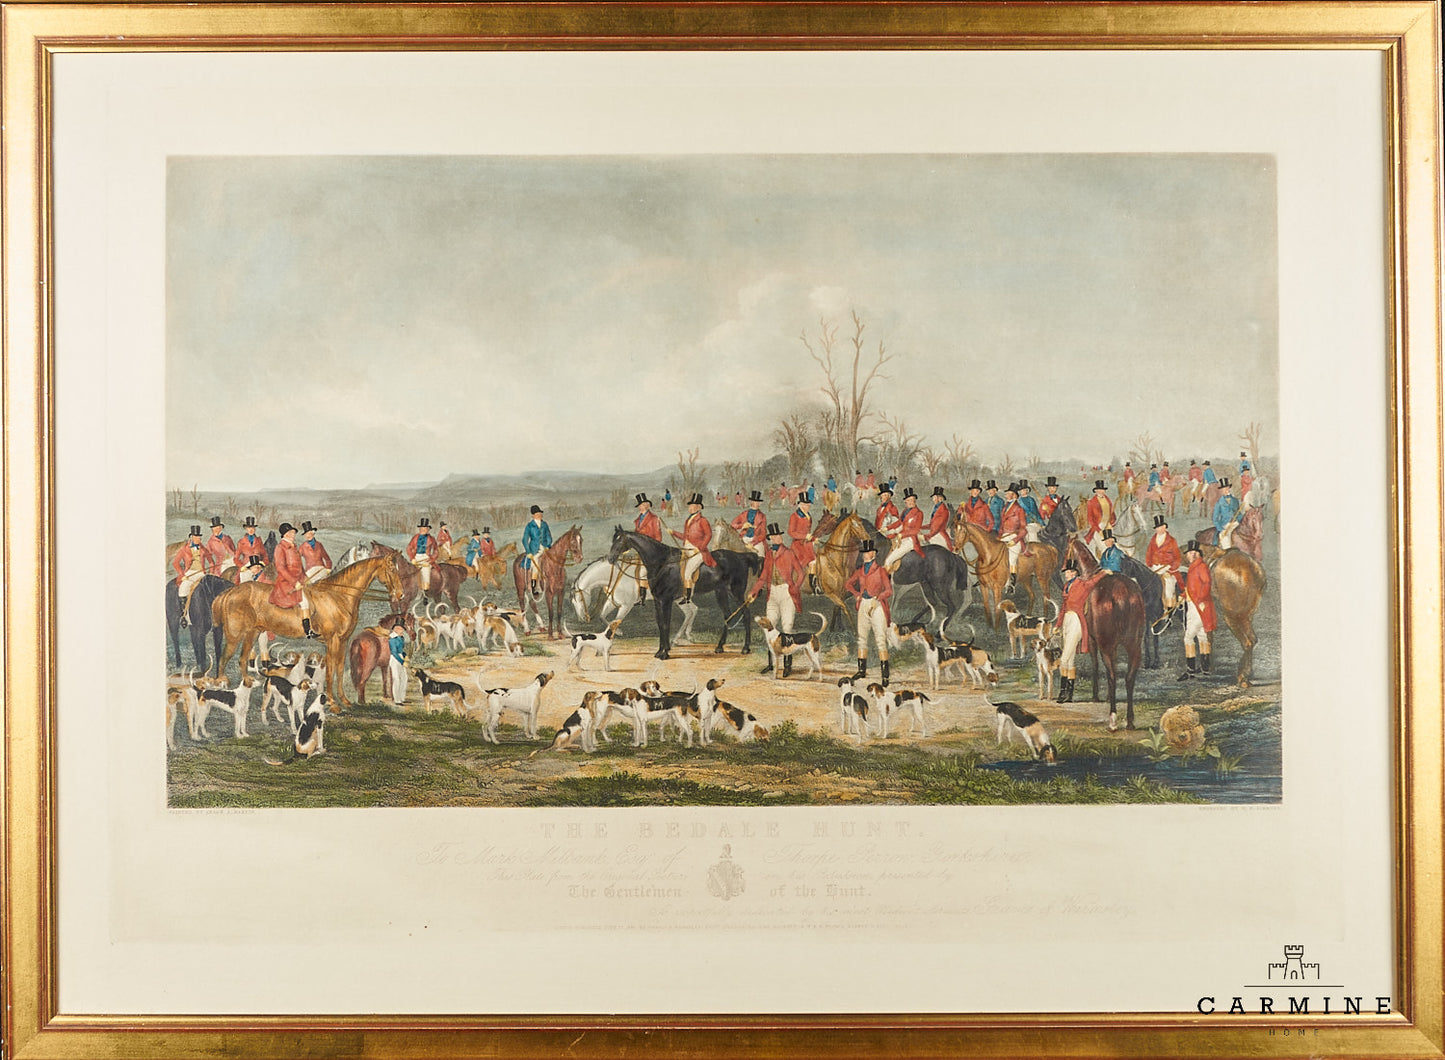 Hunting scene, "Bedale Hunt" England 18th century